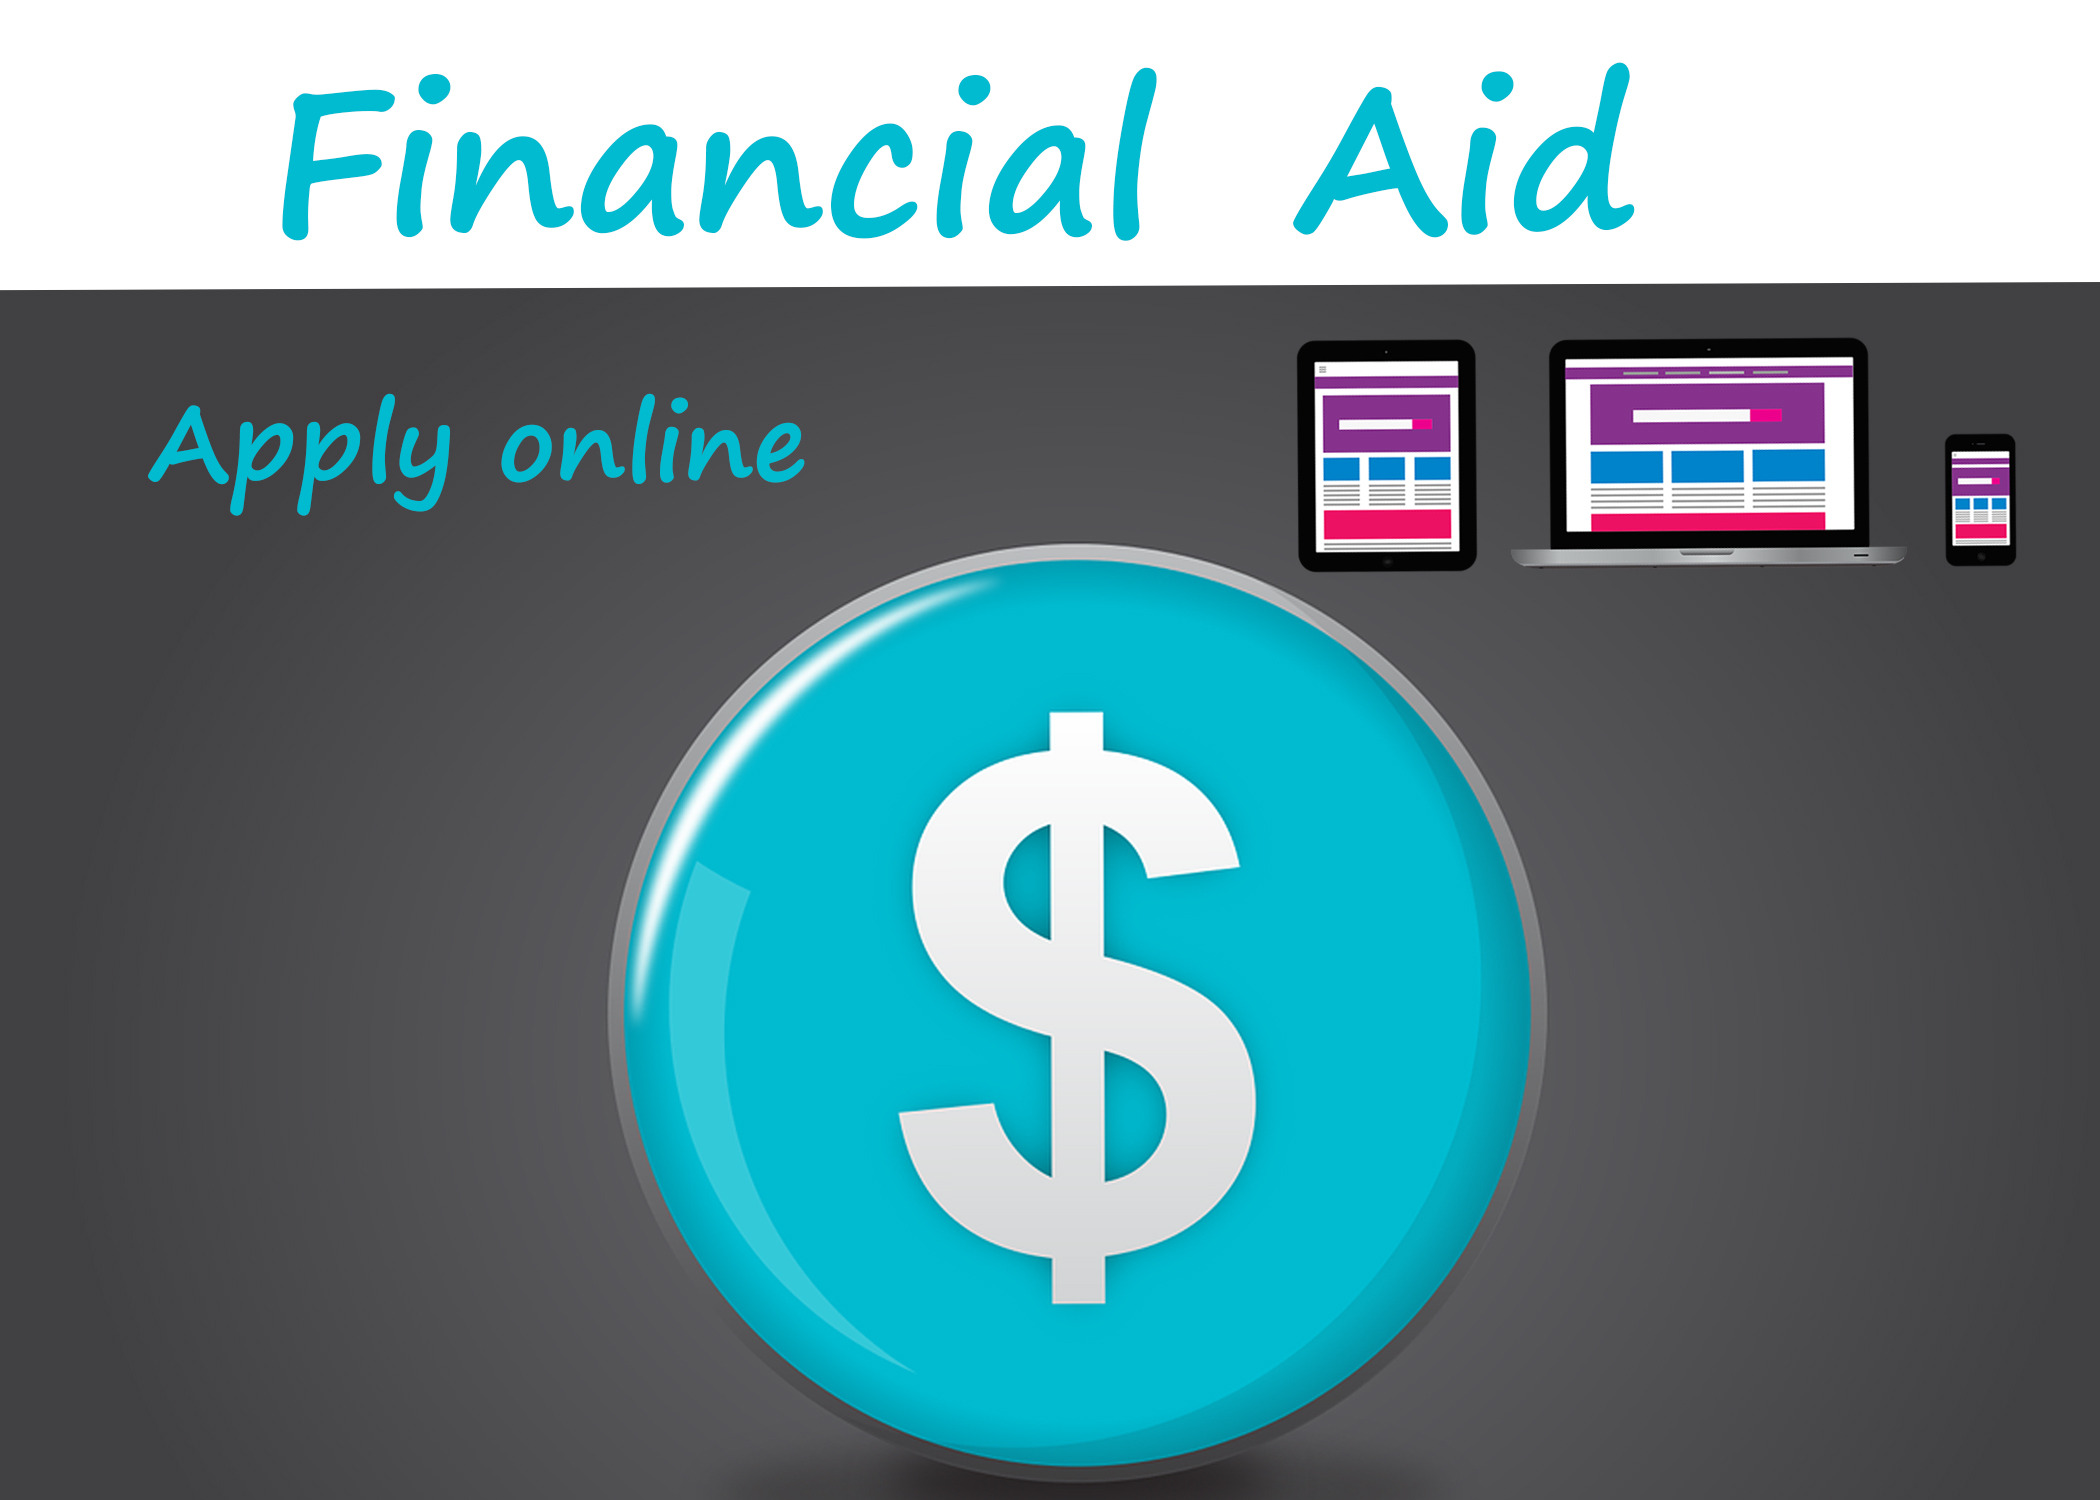 Financial aid facts and resources to help continue the educational path during COVID-19